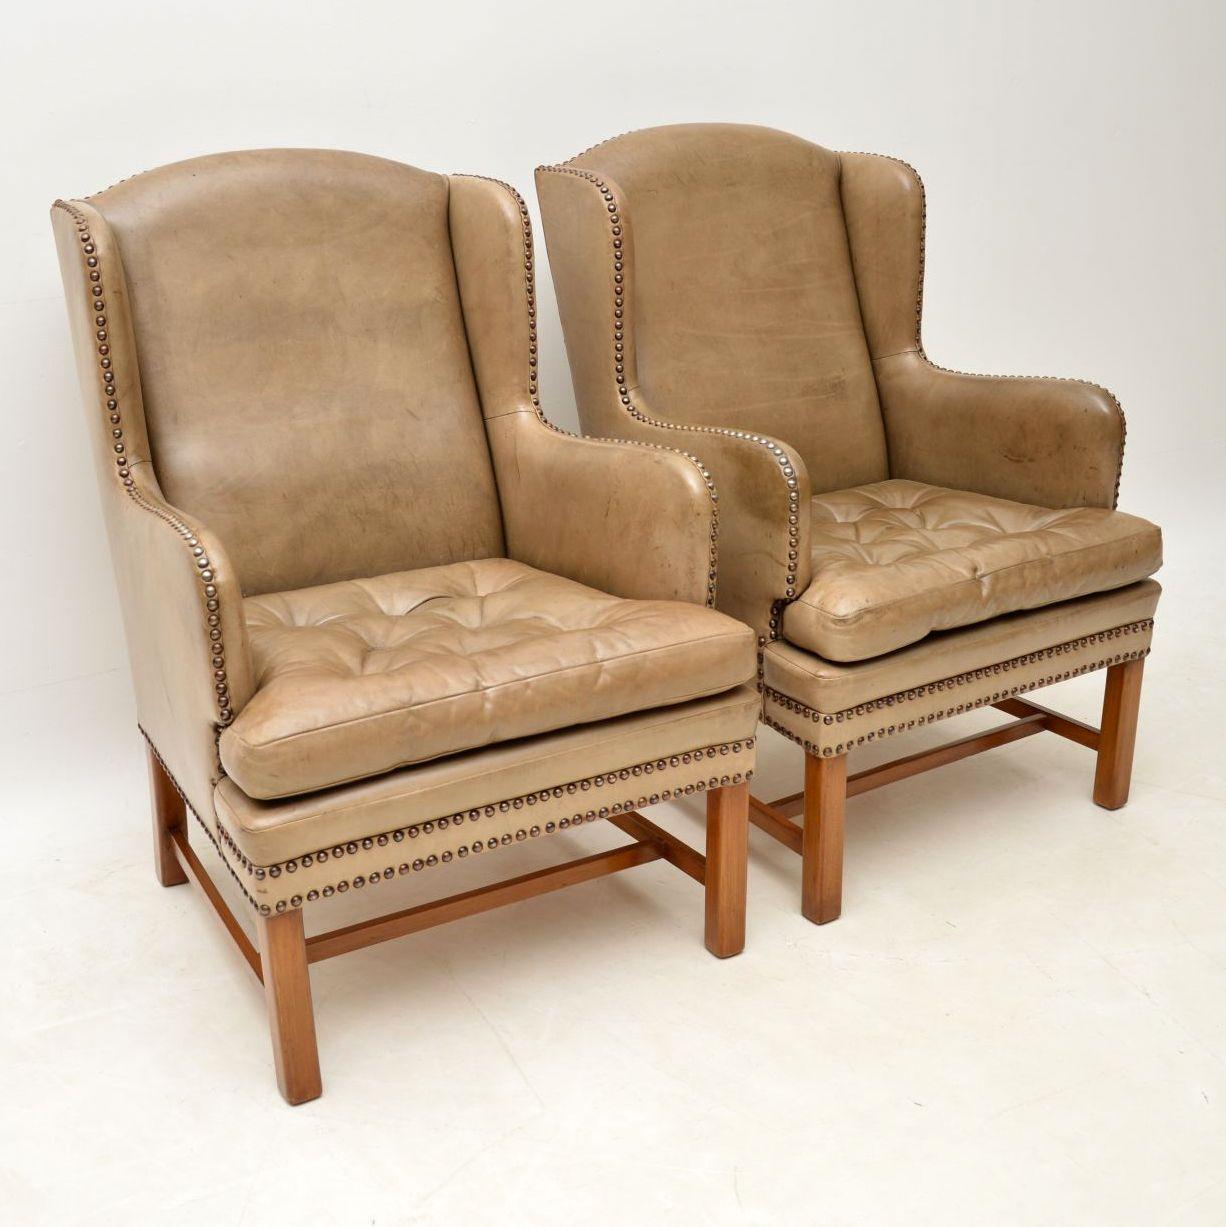 This pair of antique Swedish leather armchairs have quite small proportions for wing armchairs and they have a wonderful original color to the leather. They are in great condition, very comfortable and I would date them to circa 1930s-1950s period.